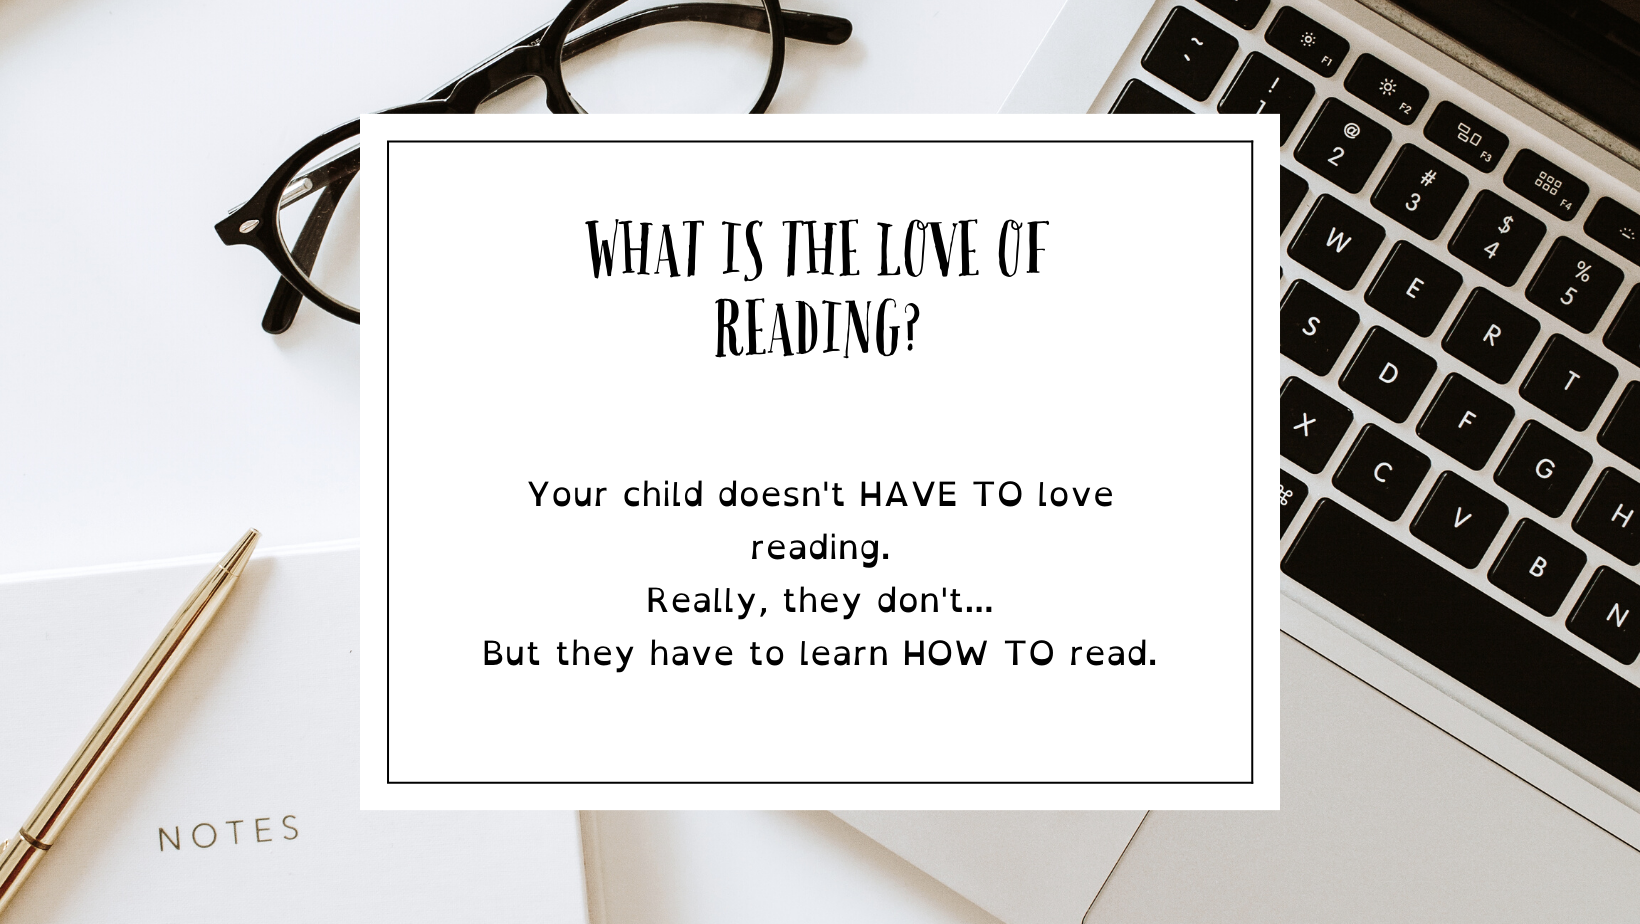 What is the love of reading? 